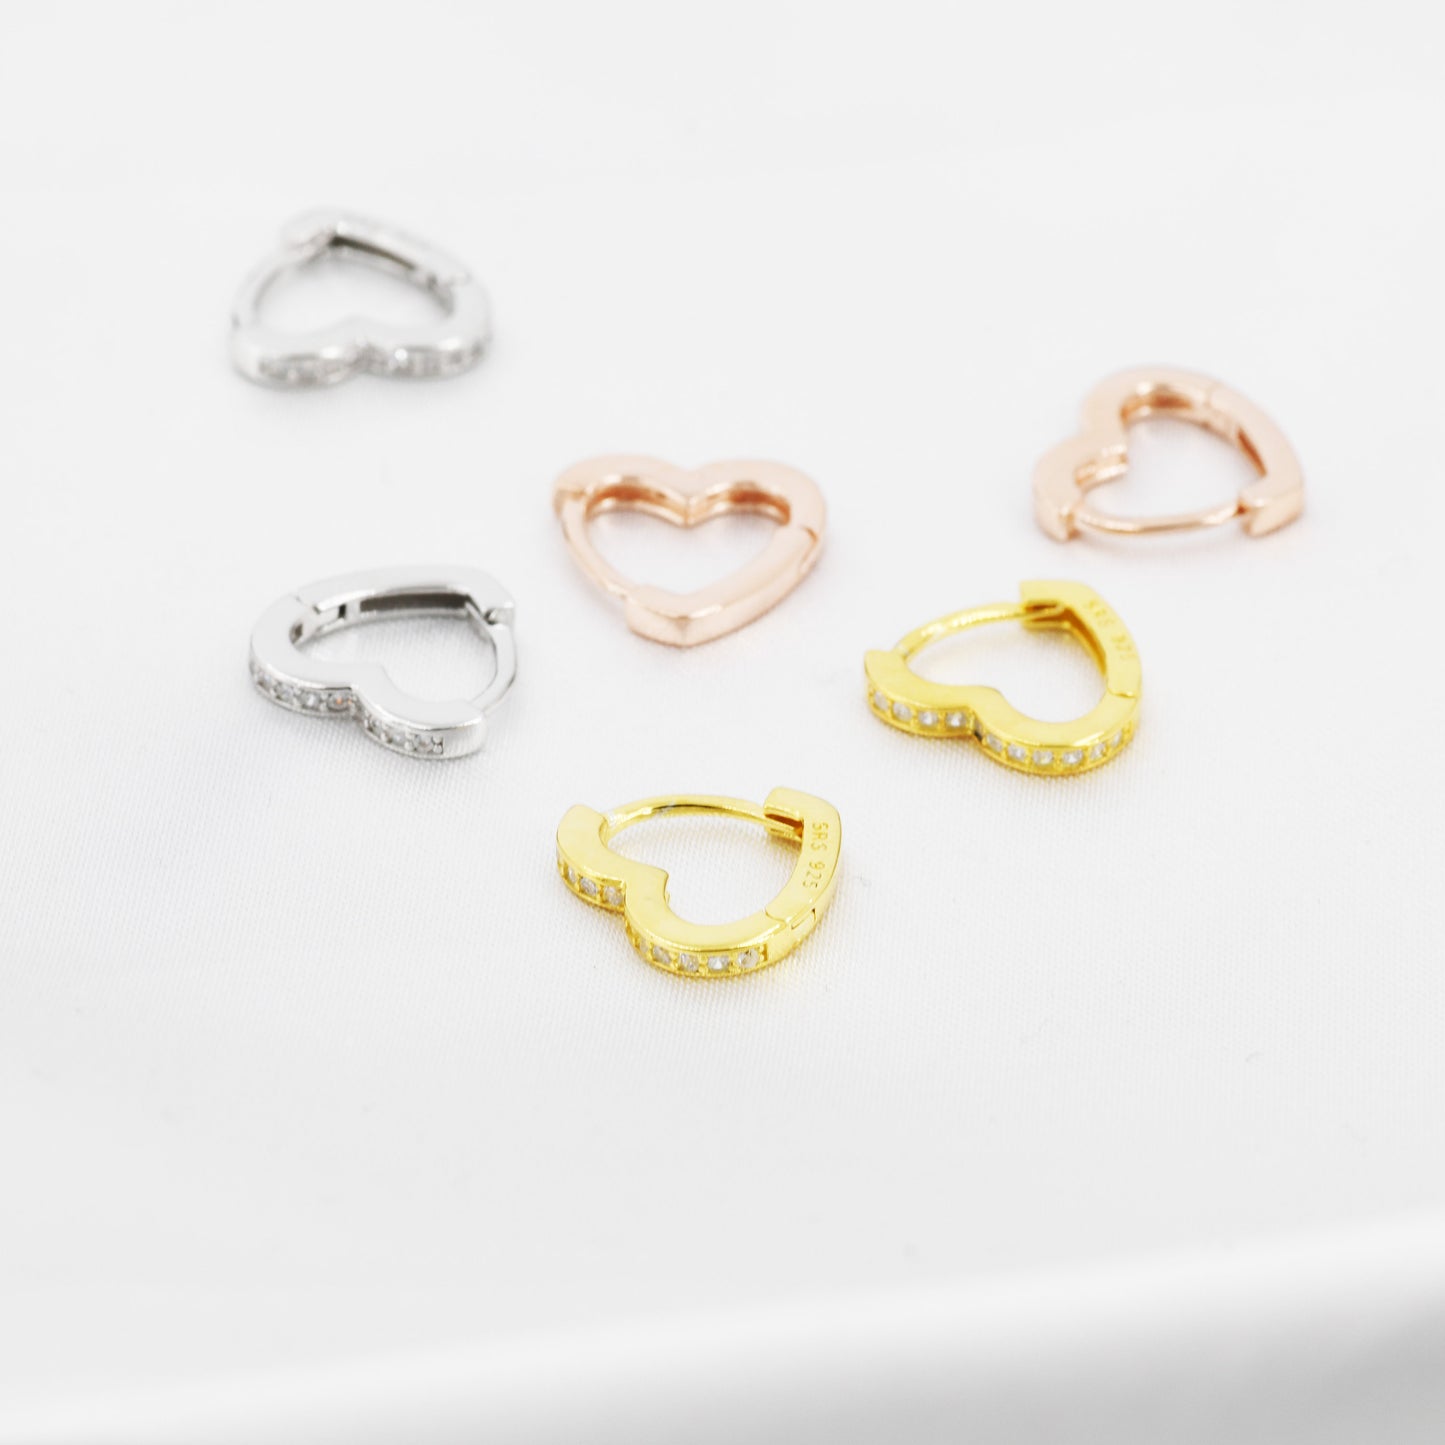 Heart Huggie Hoop Earrings in Sterling Silver, Silver, Gold or Rose Gold with CZ Crystals, Minimalist Geometric Design